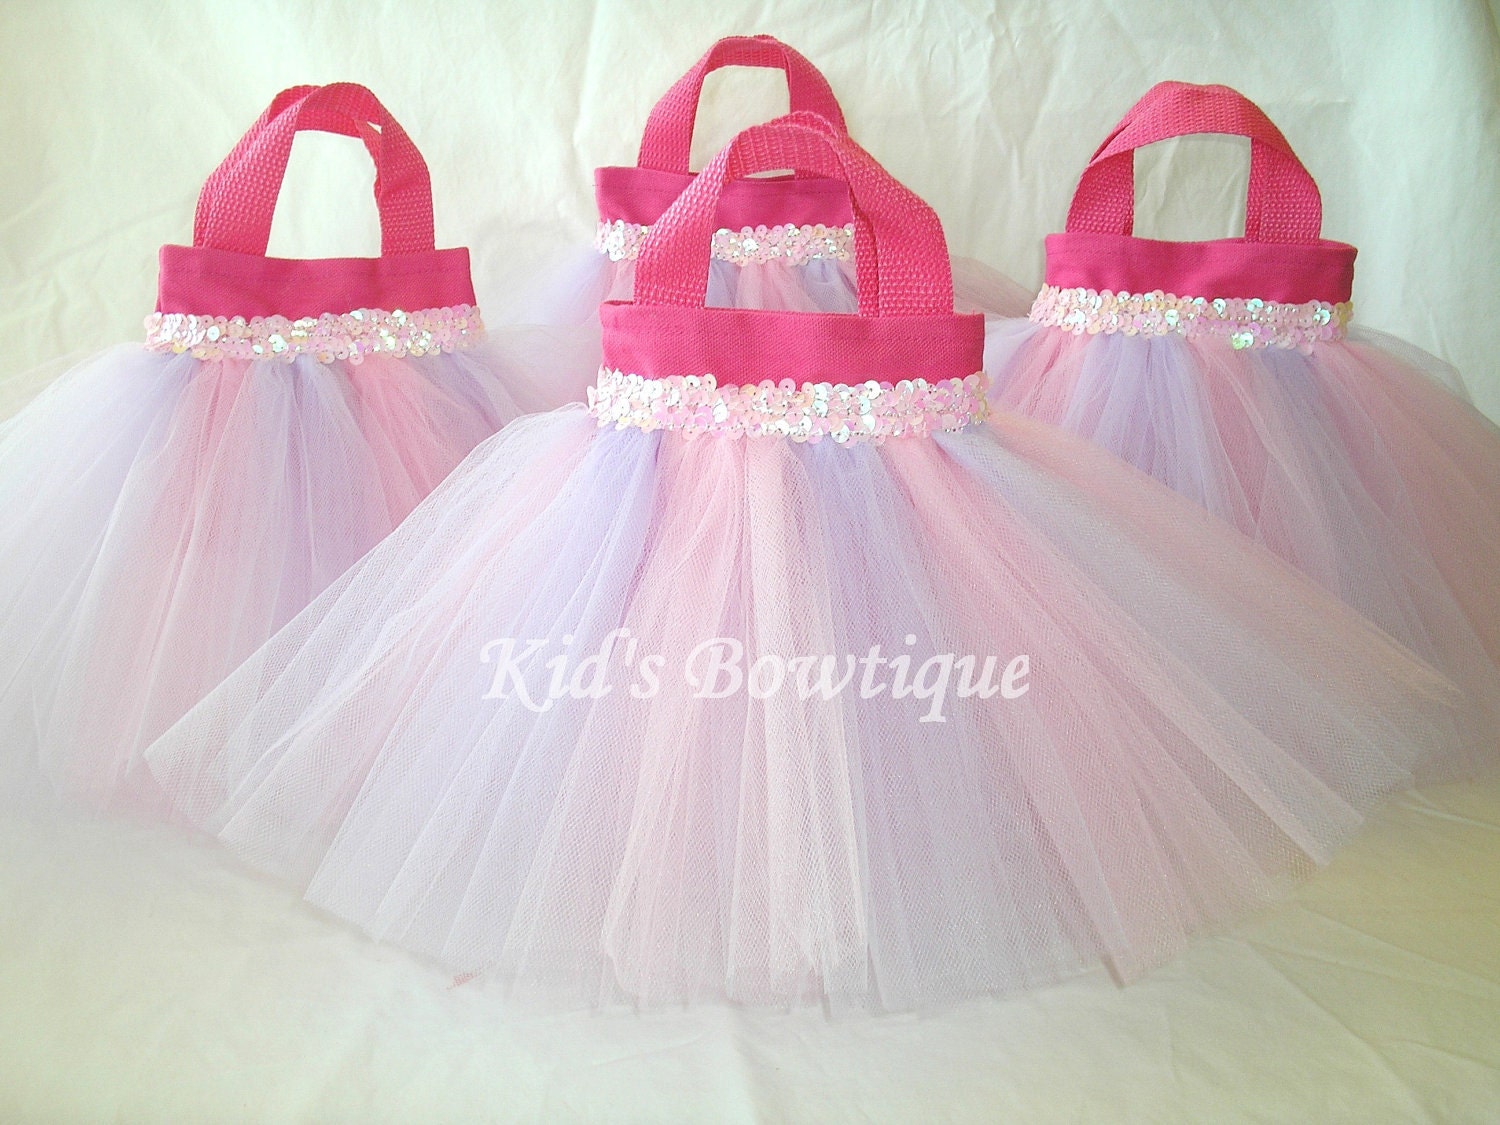 10 Pink and Lavender Party Favor Tutu Bags Birthday Party | Etsy